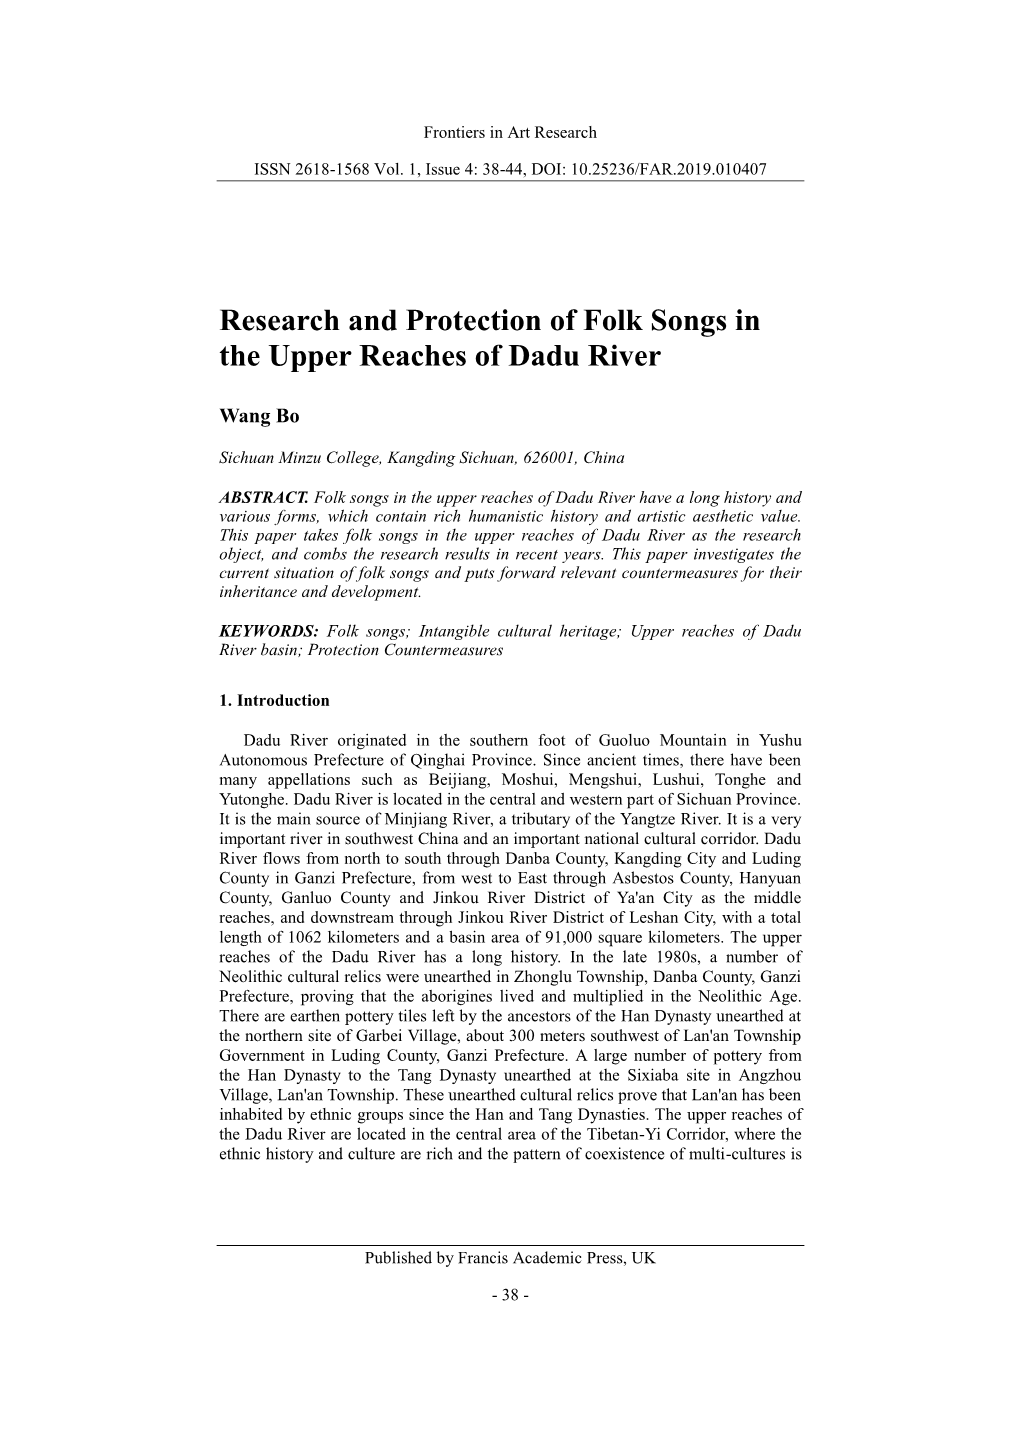 Research and Protection of Folk Songs in the Upper Reaches of Dadu River